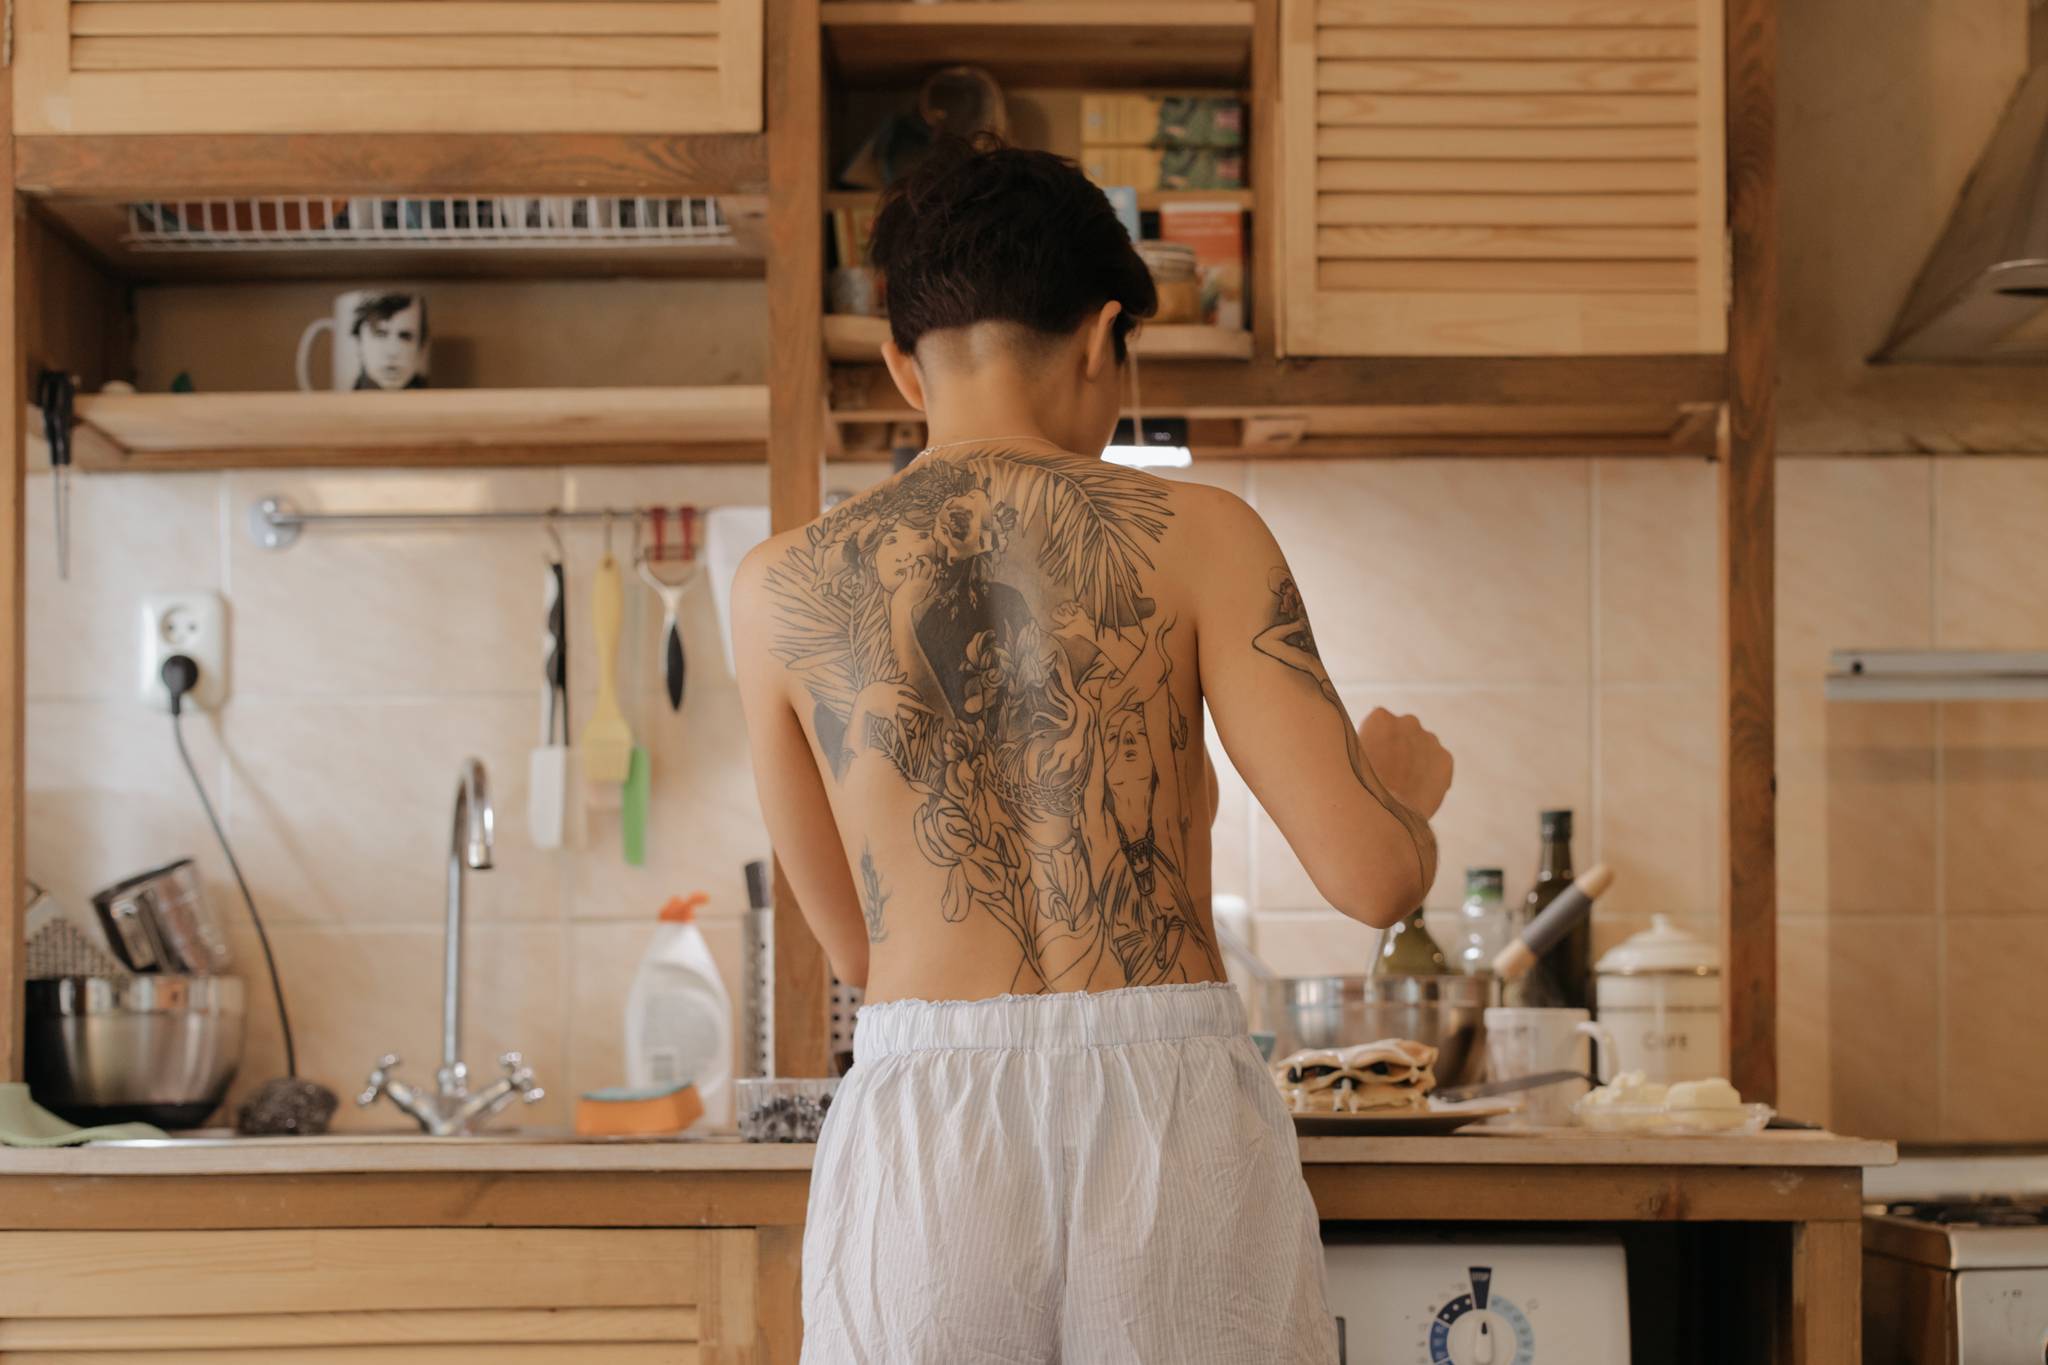 Young people in Japan are quietly tackling tattoo taboos